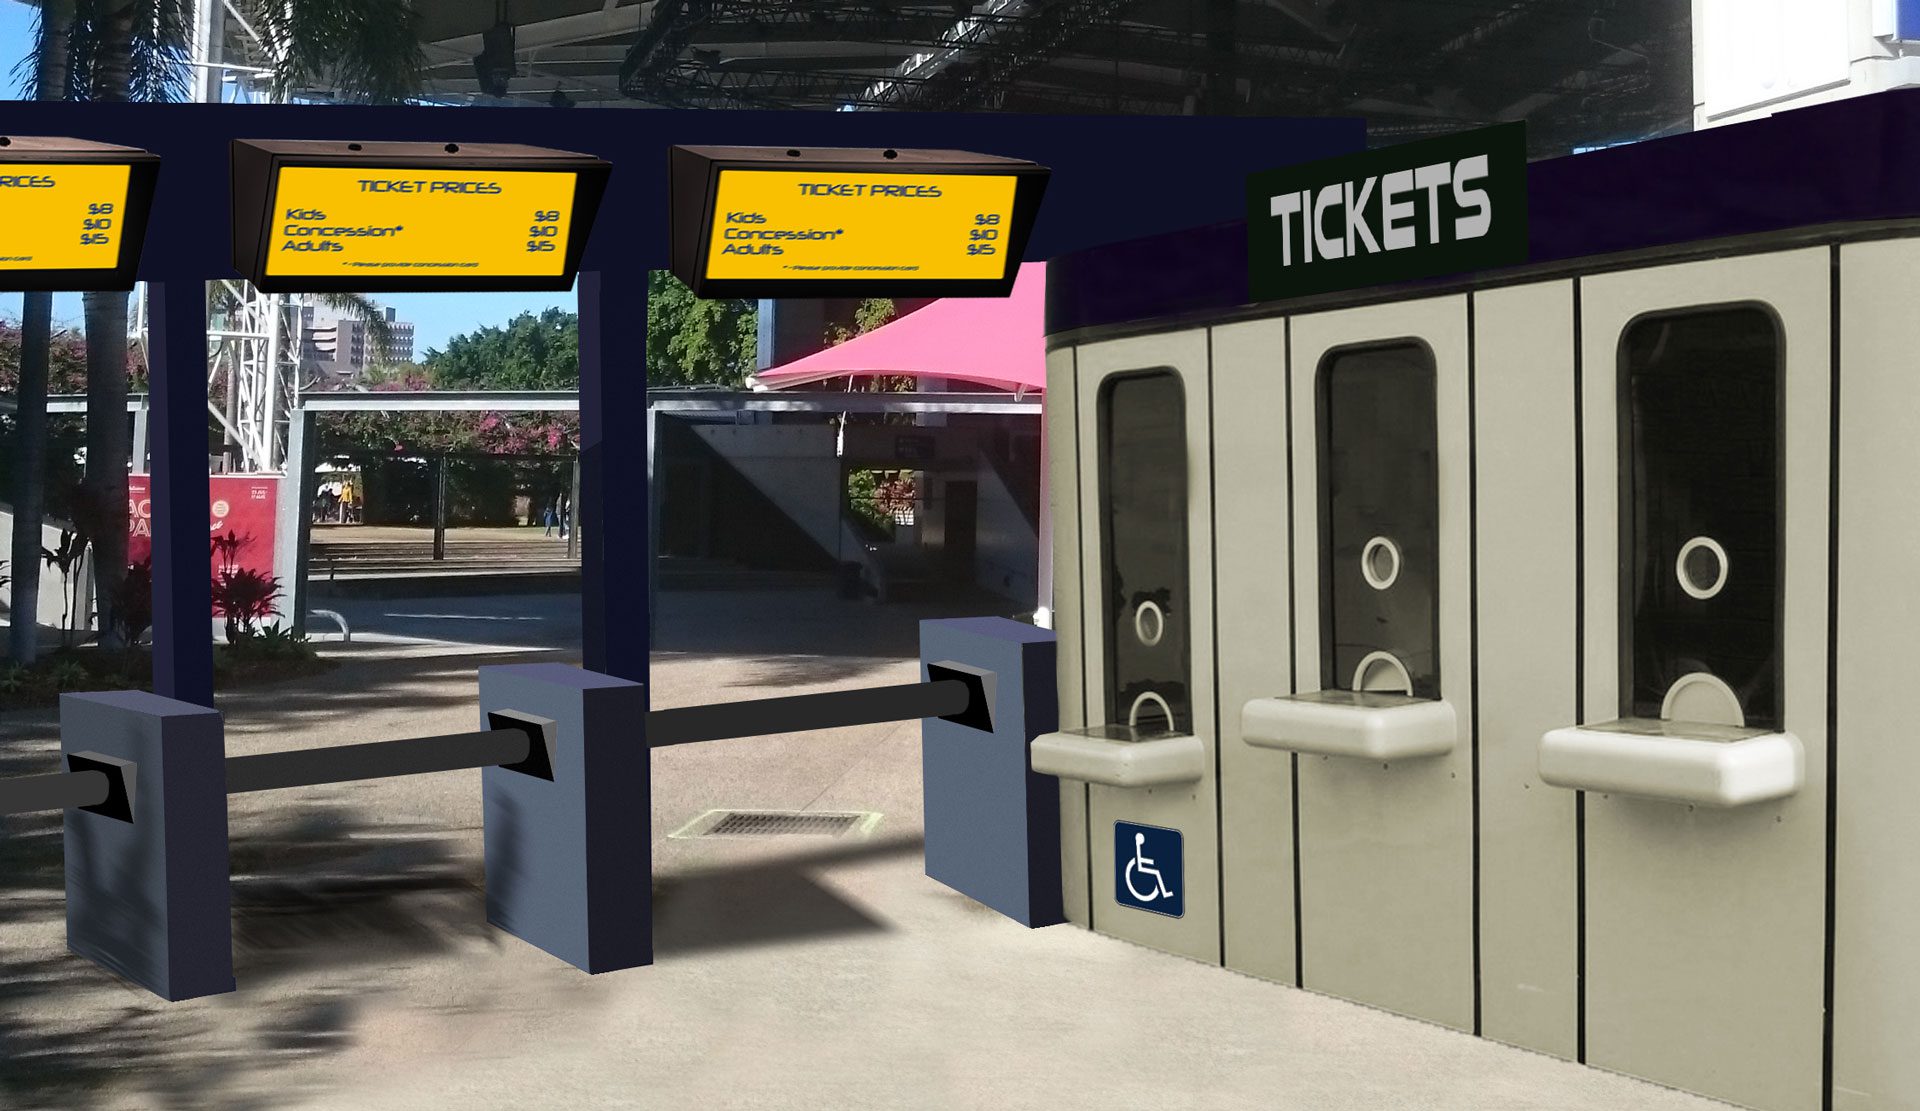 Outdoor Digital Signage Solutions for Ticket Box